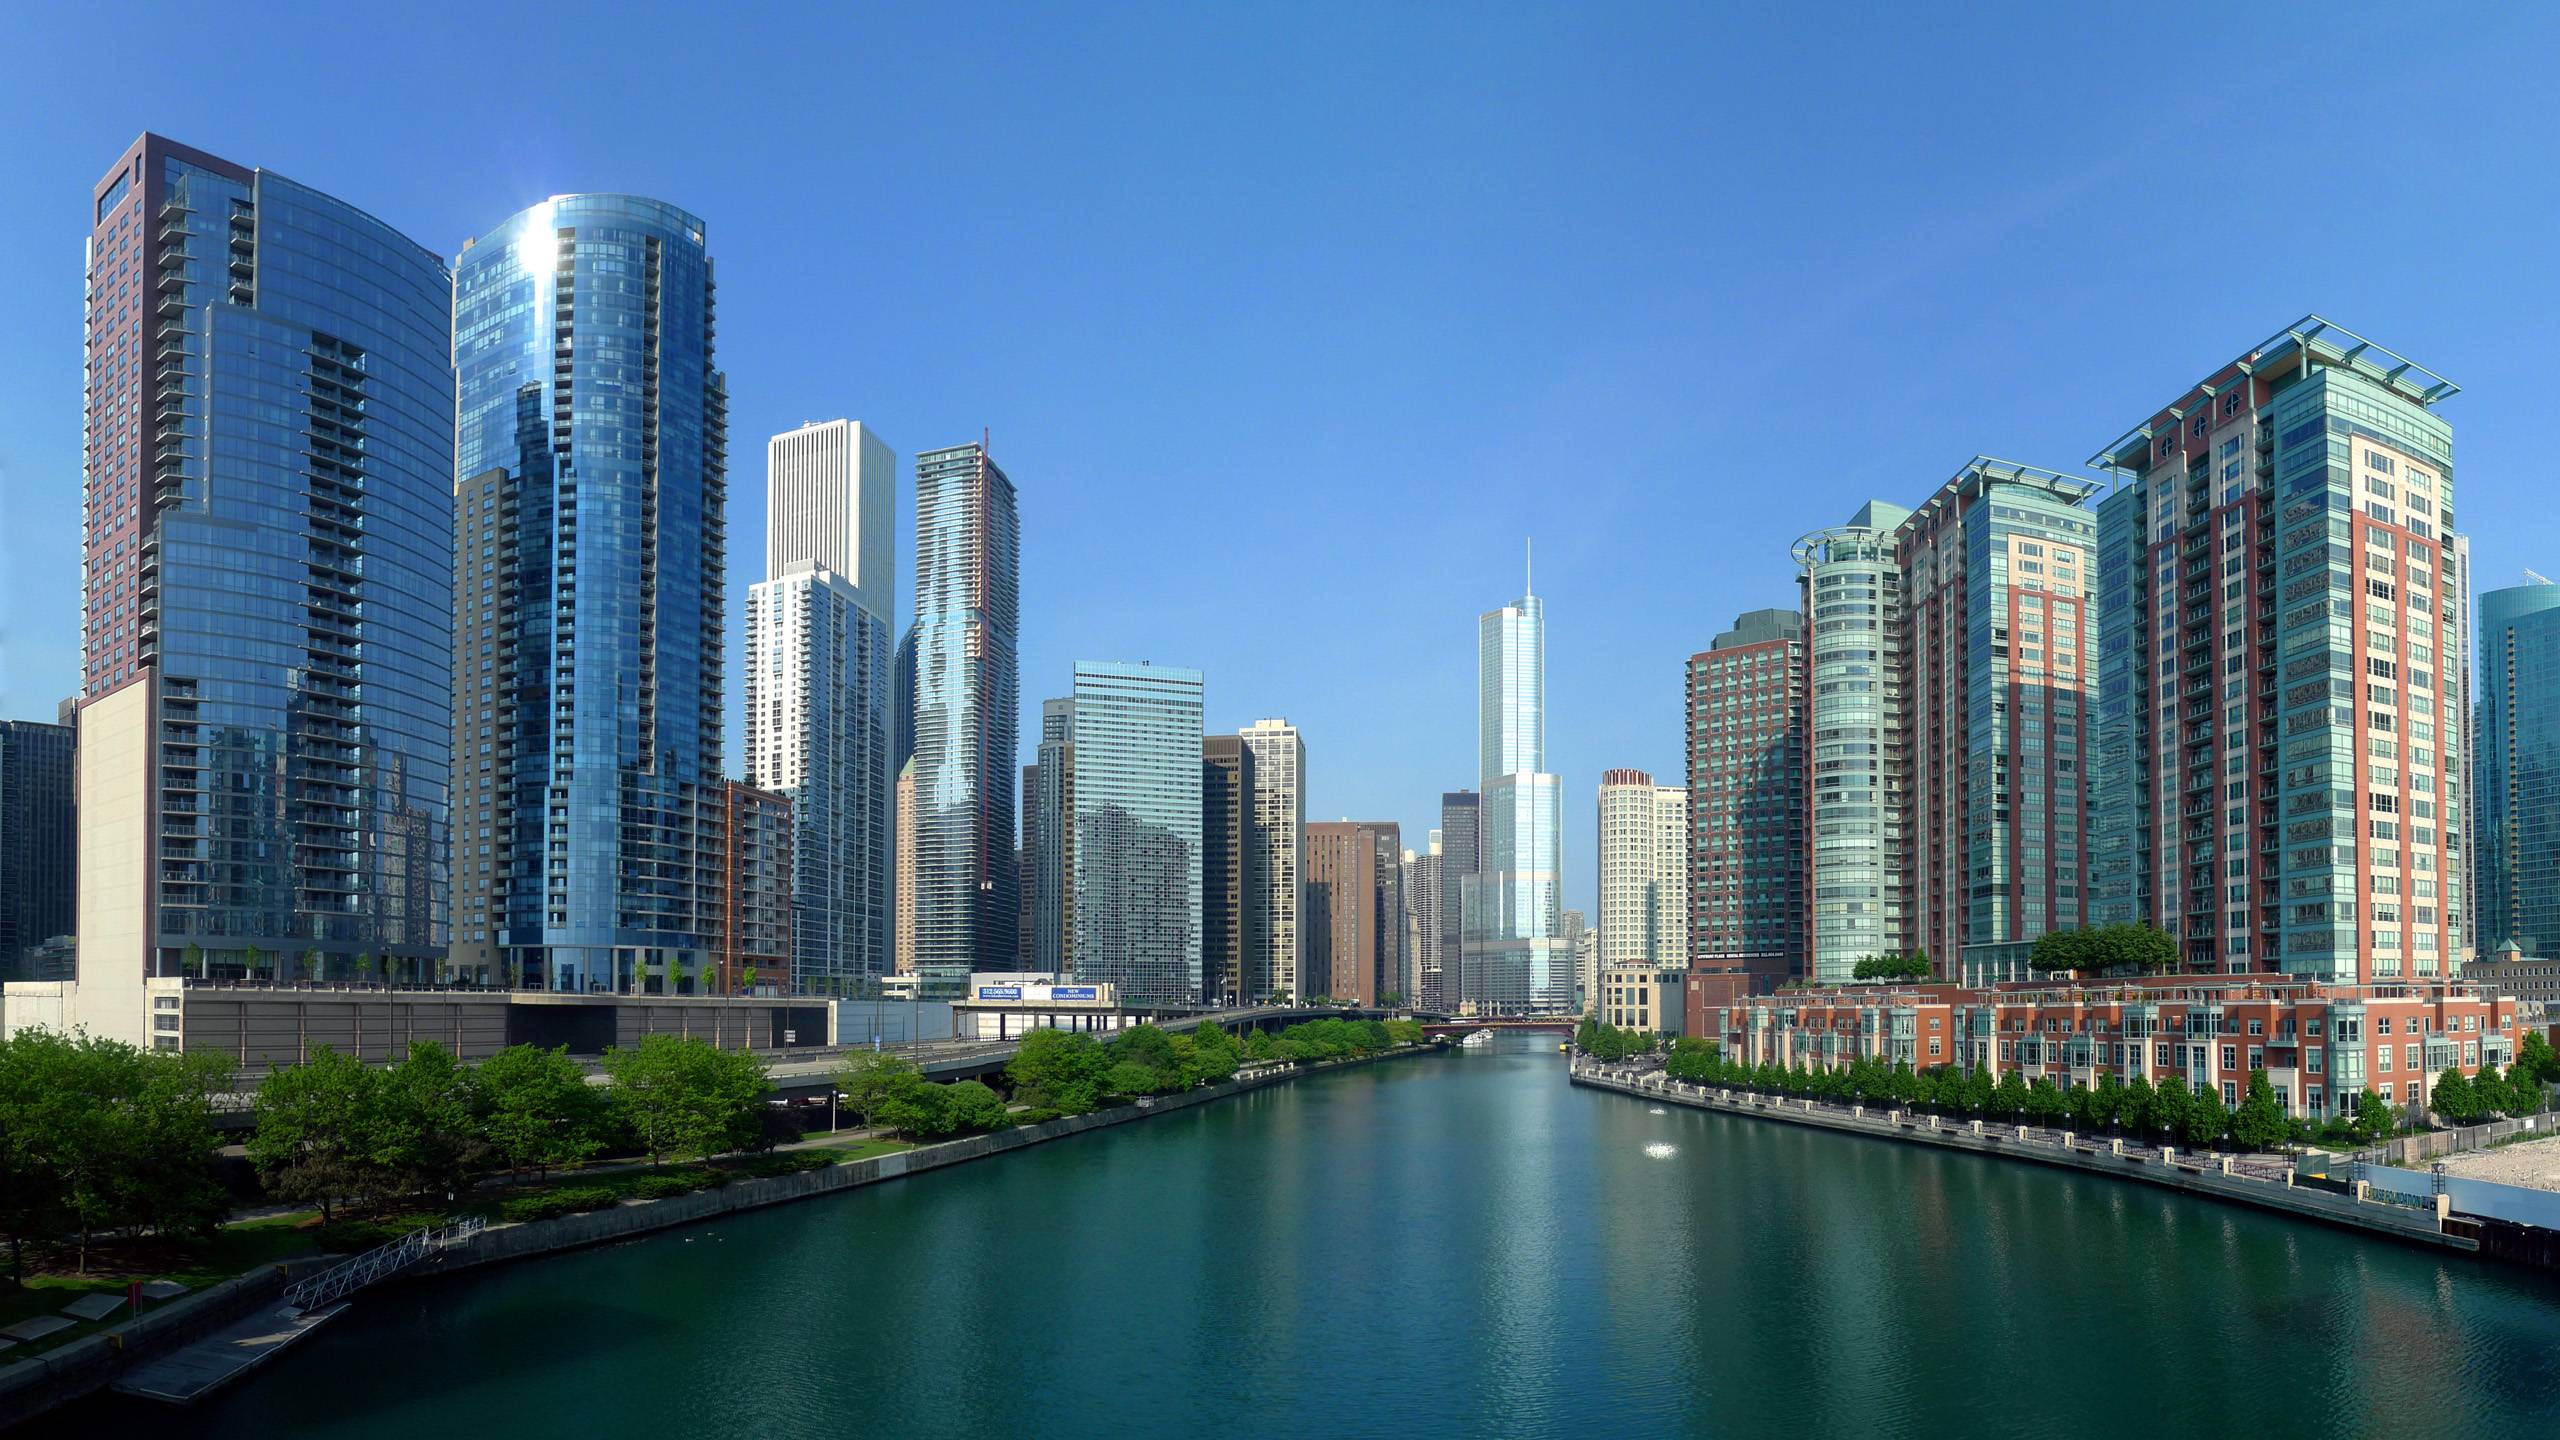 Gallery for - chicago skyline wallpaper for walls